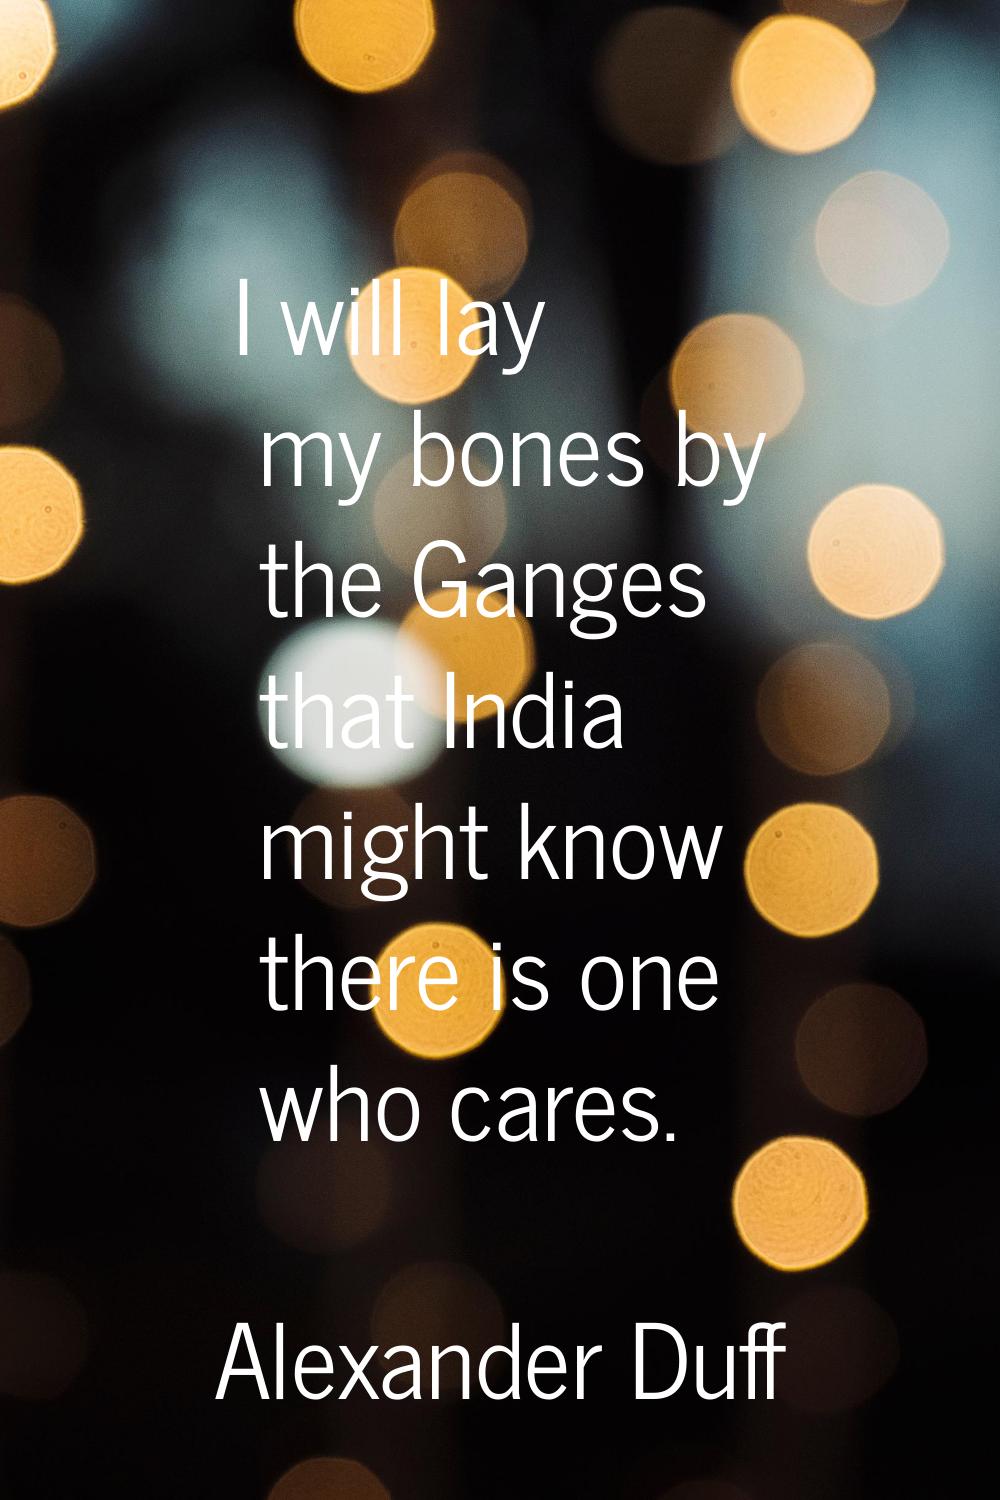 I will lay my bones by the Ganges that India might know there is one who cares.